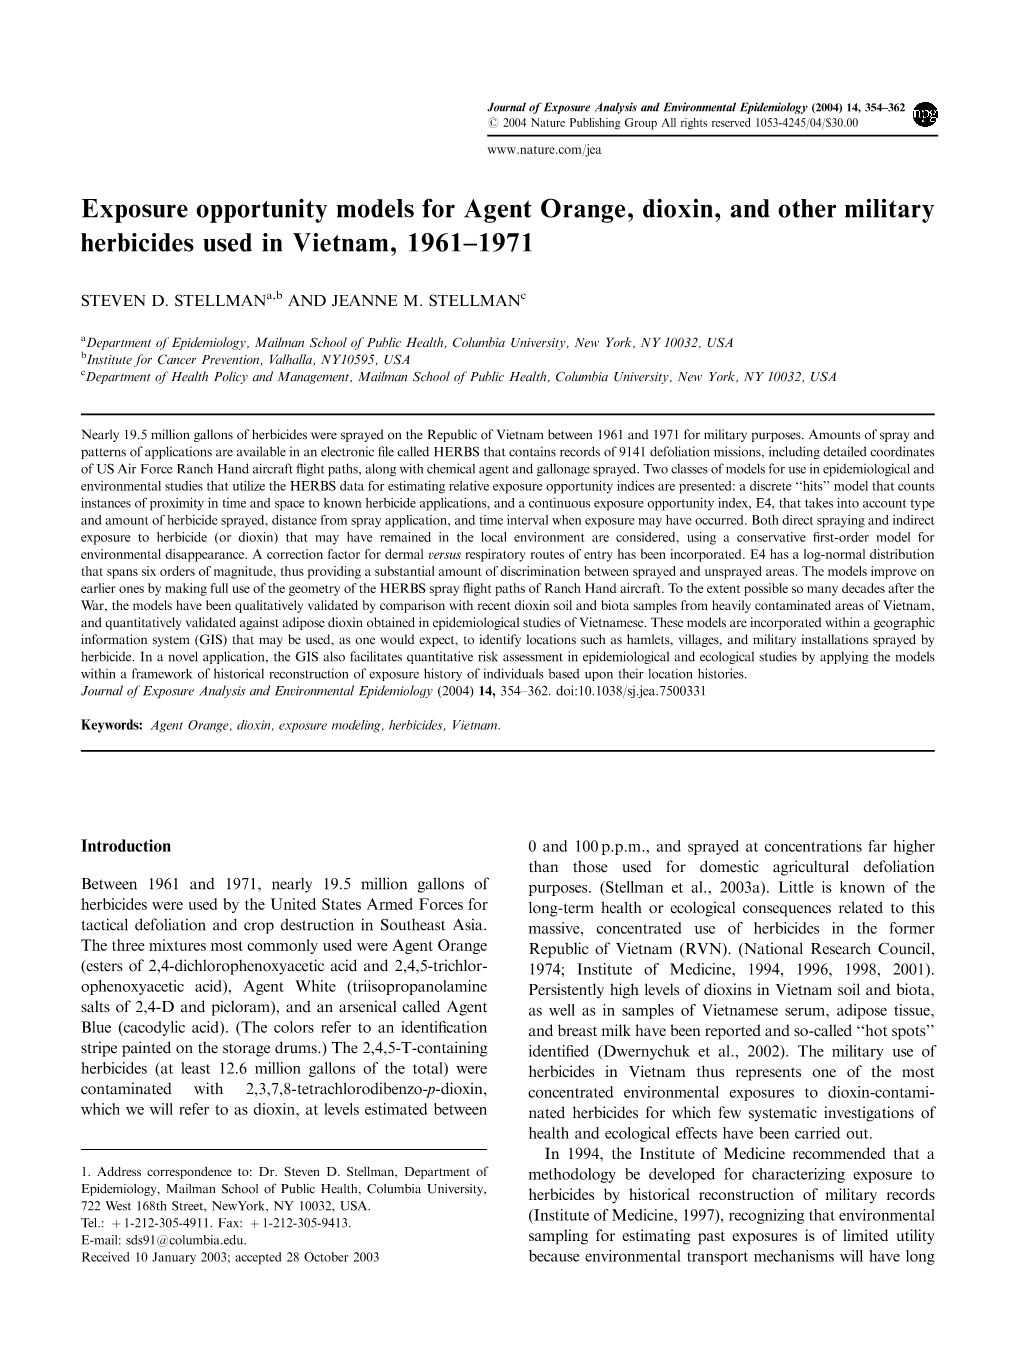 Exposure Opportunity Models for Agent Orange, Dioxin, and Other Military Herbicides Used in Vietnam, 1961–1971